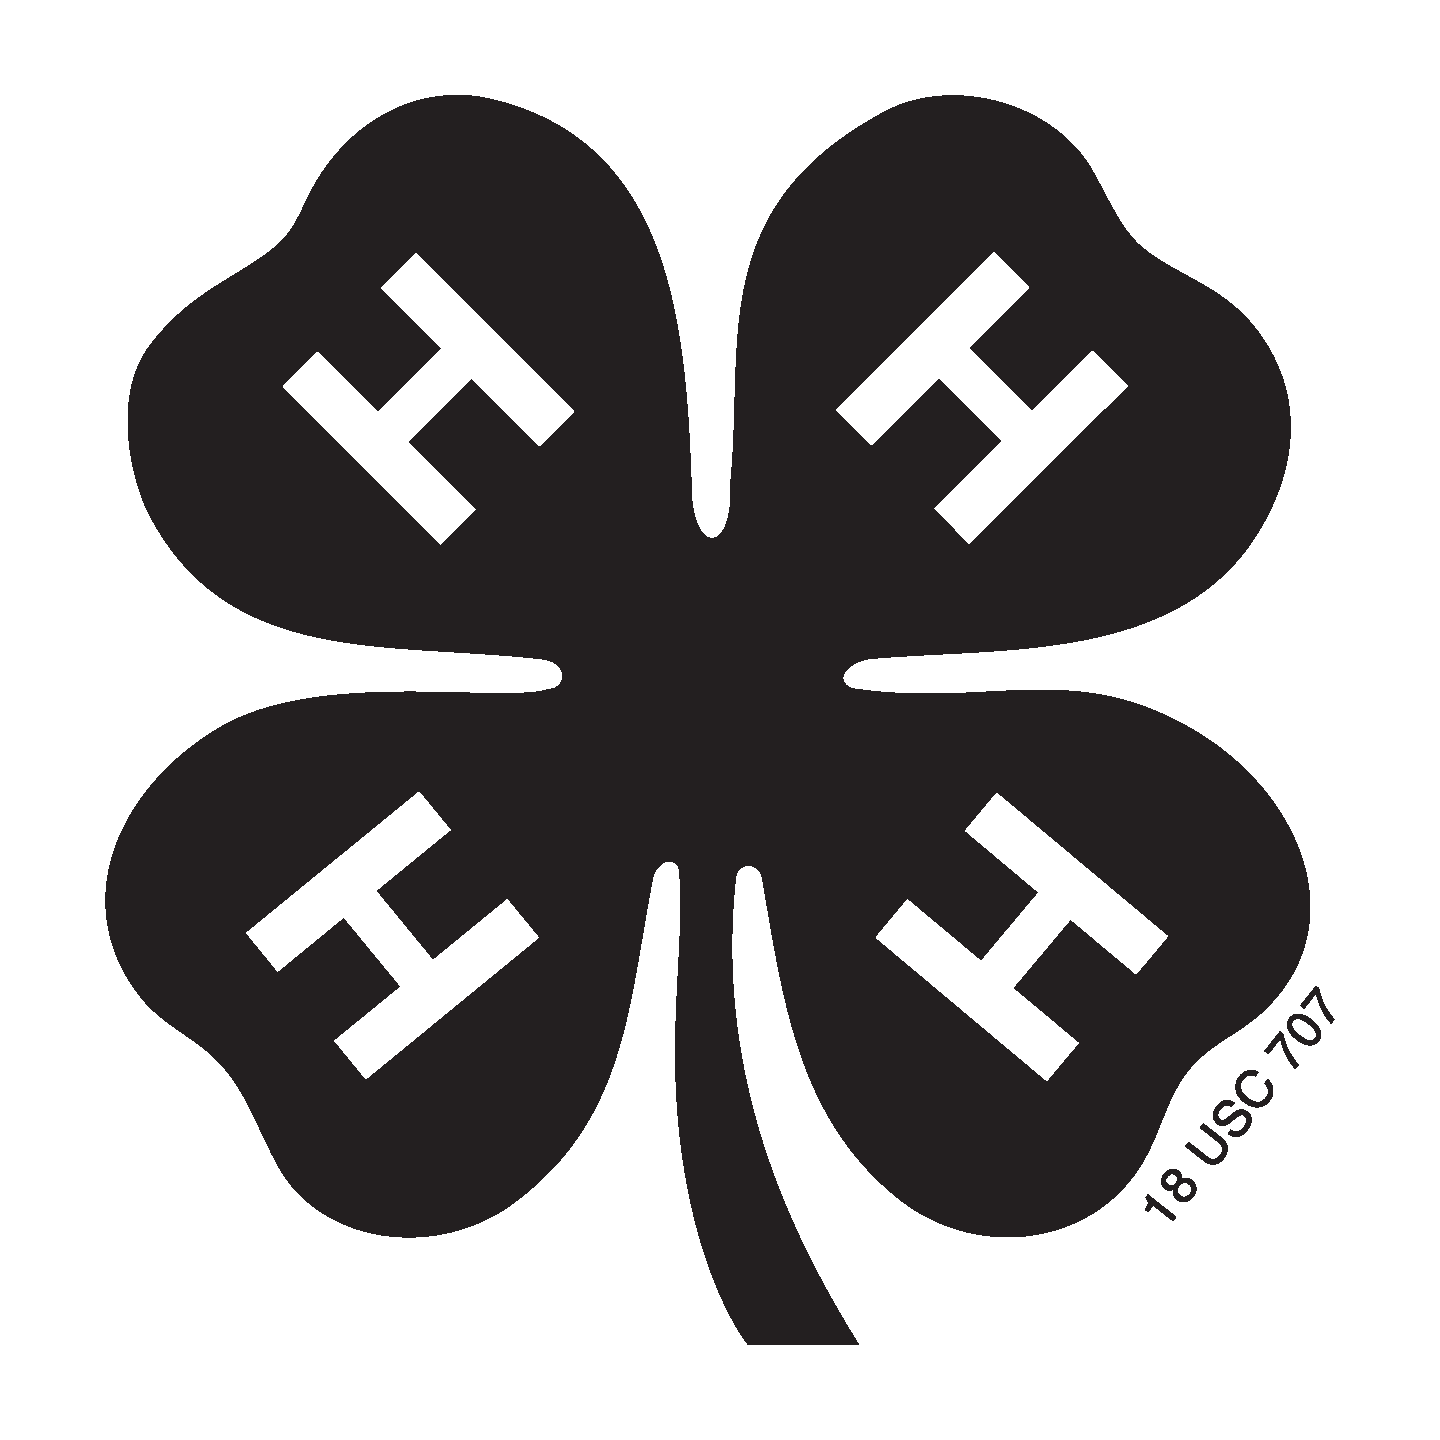 clover clipart black and white